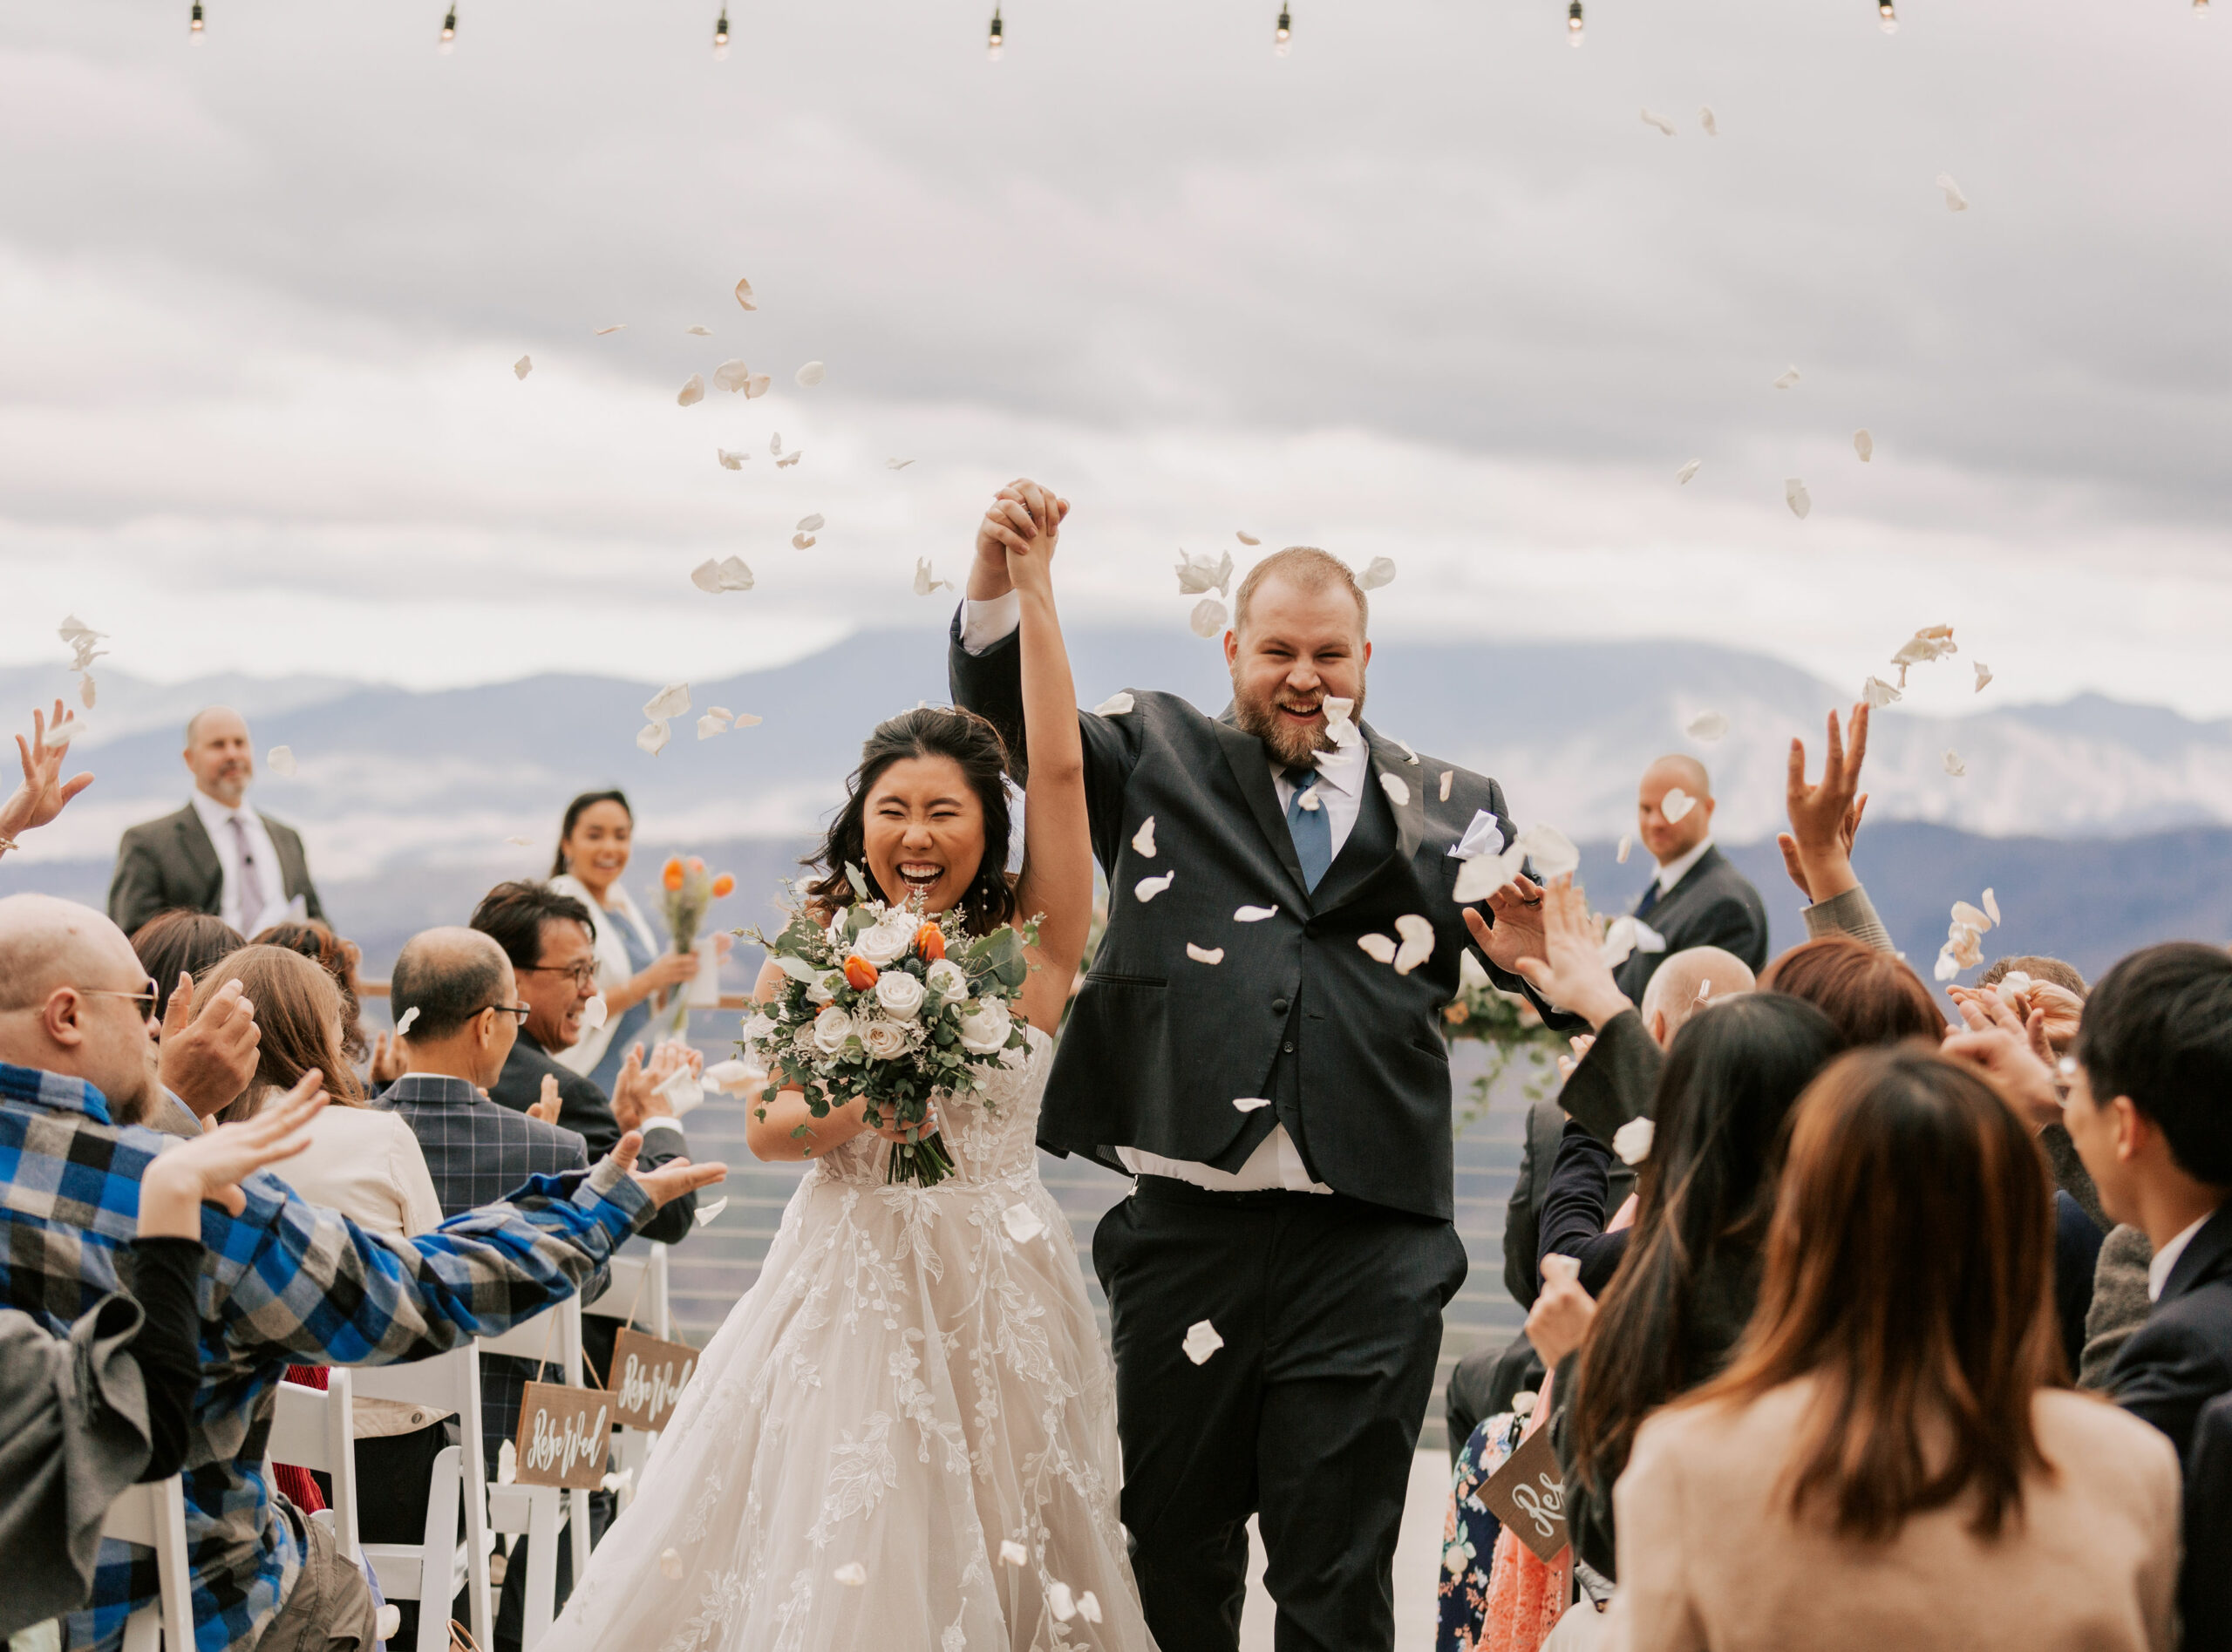 flower petal toss with bride and groom